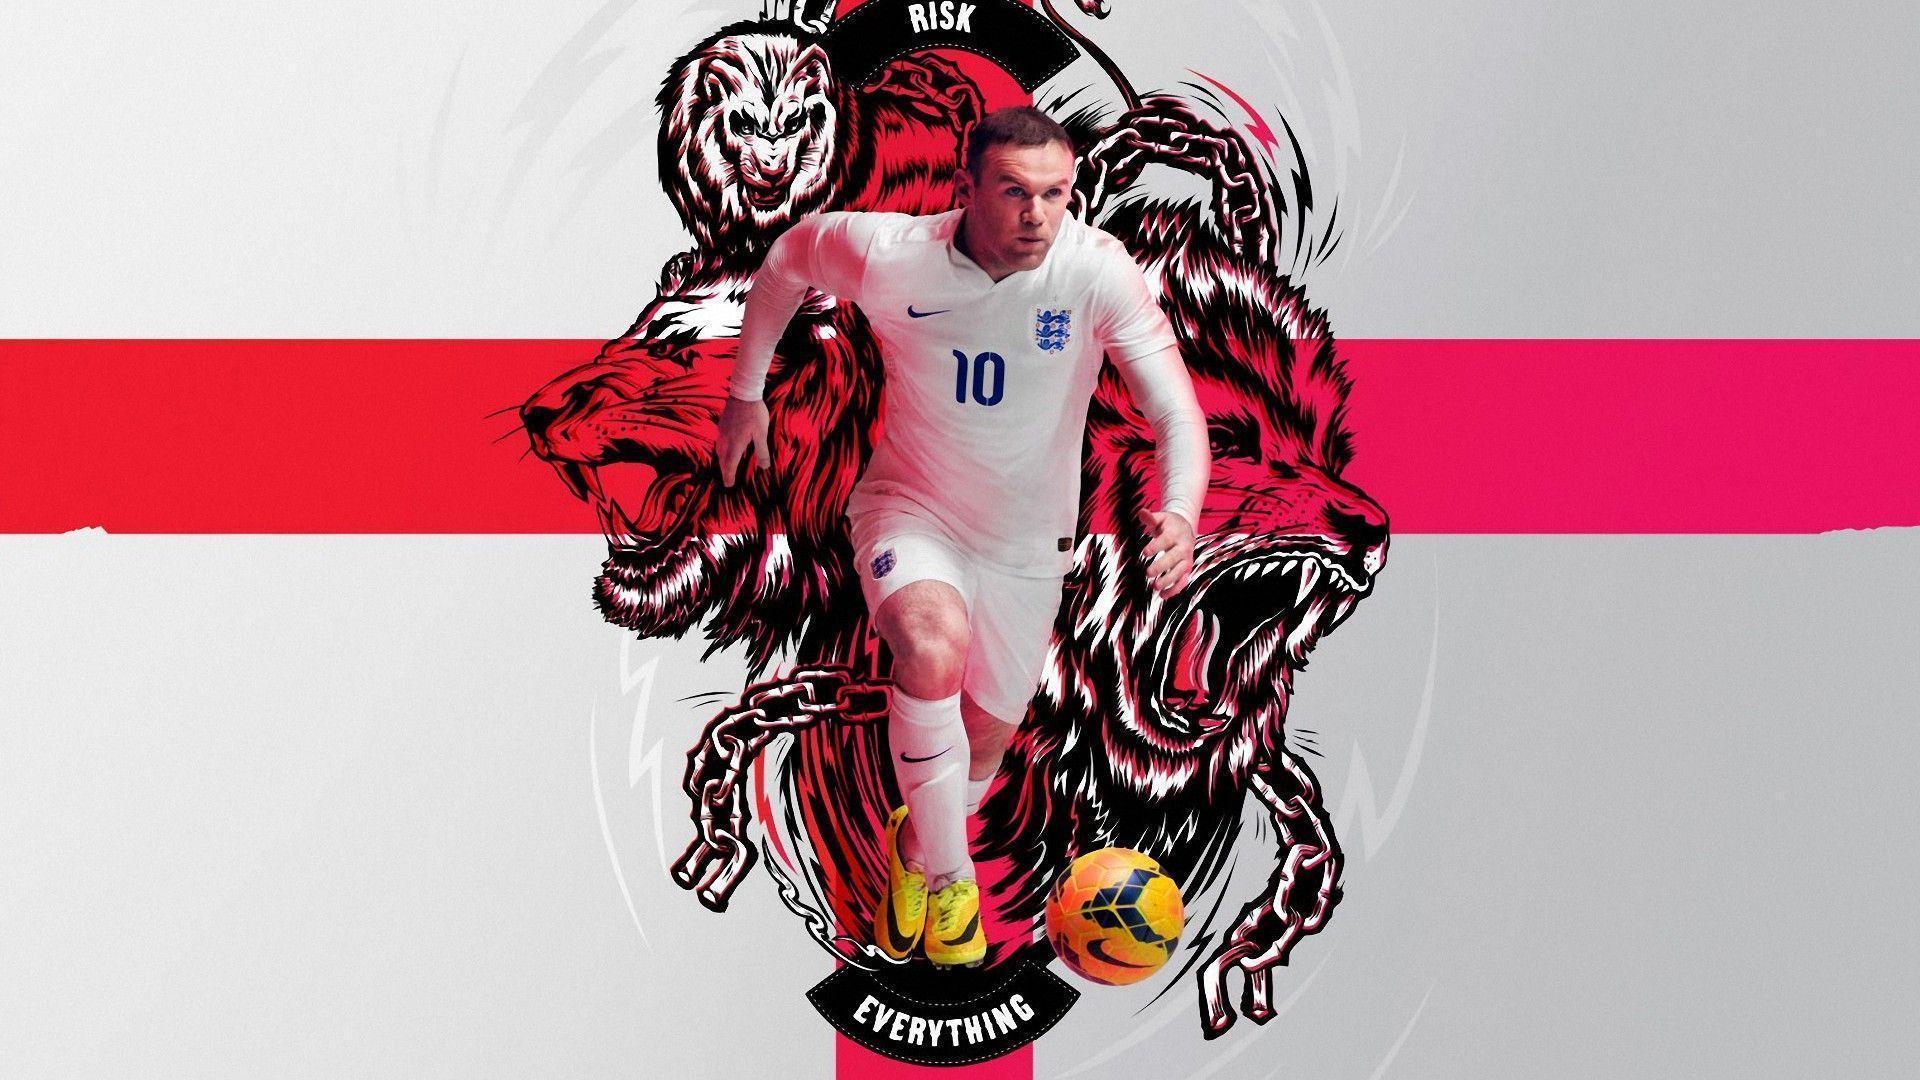 Rooney 2014 England Nike Risk Everything Wallpaper Wide or HD